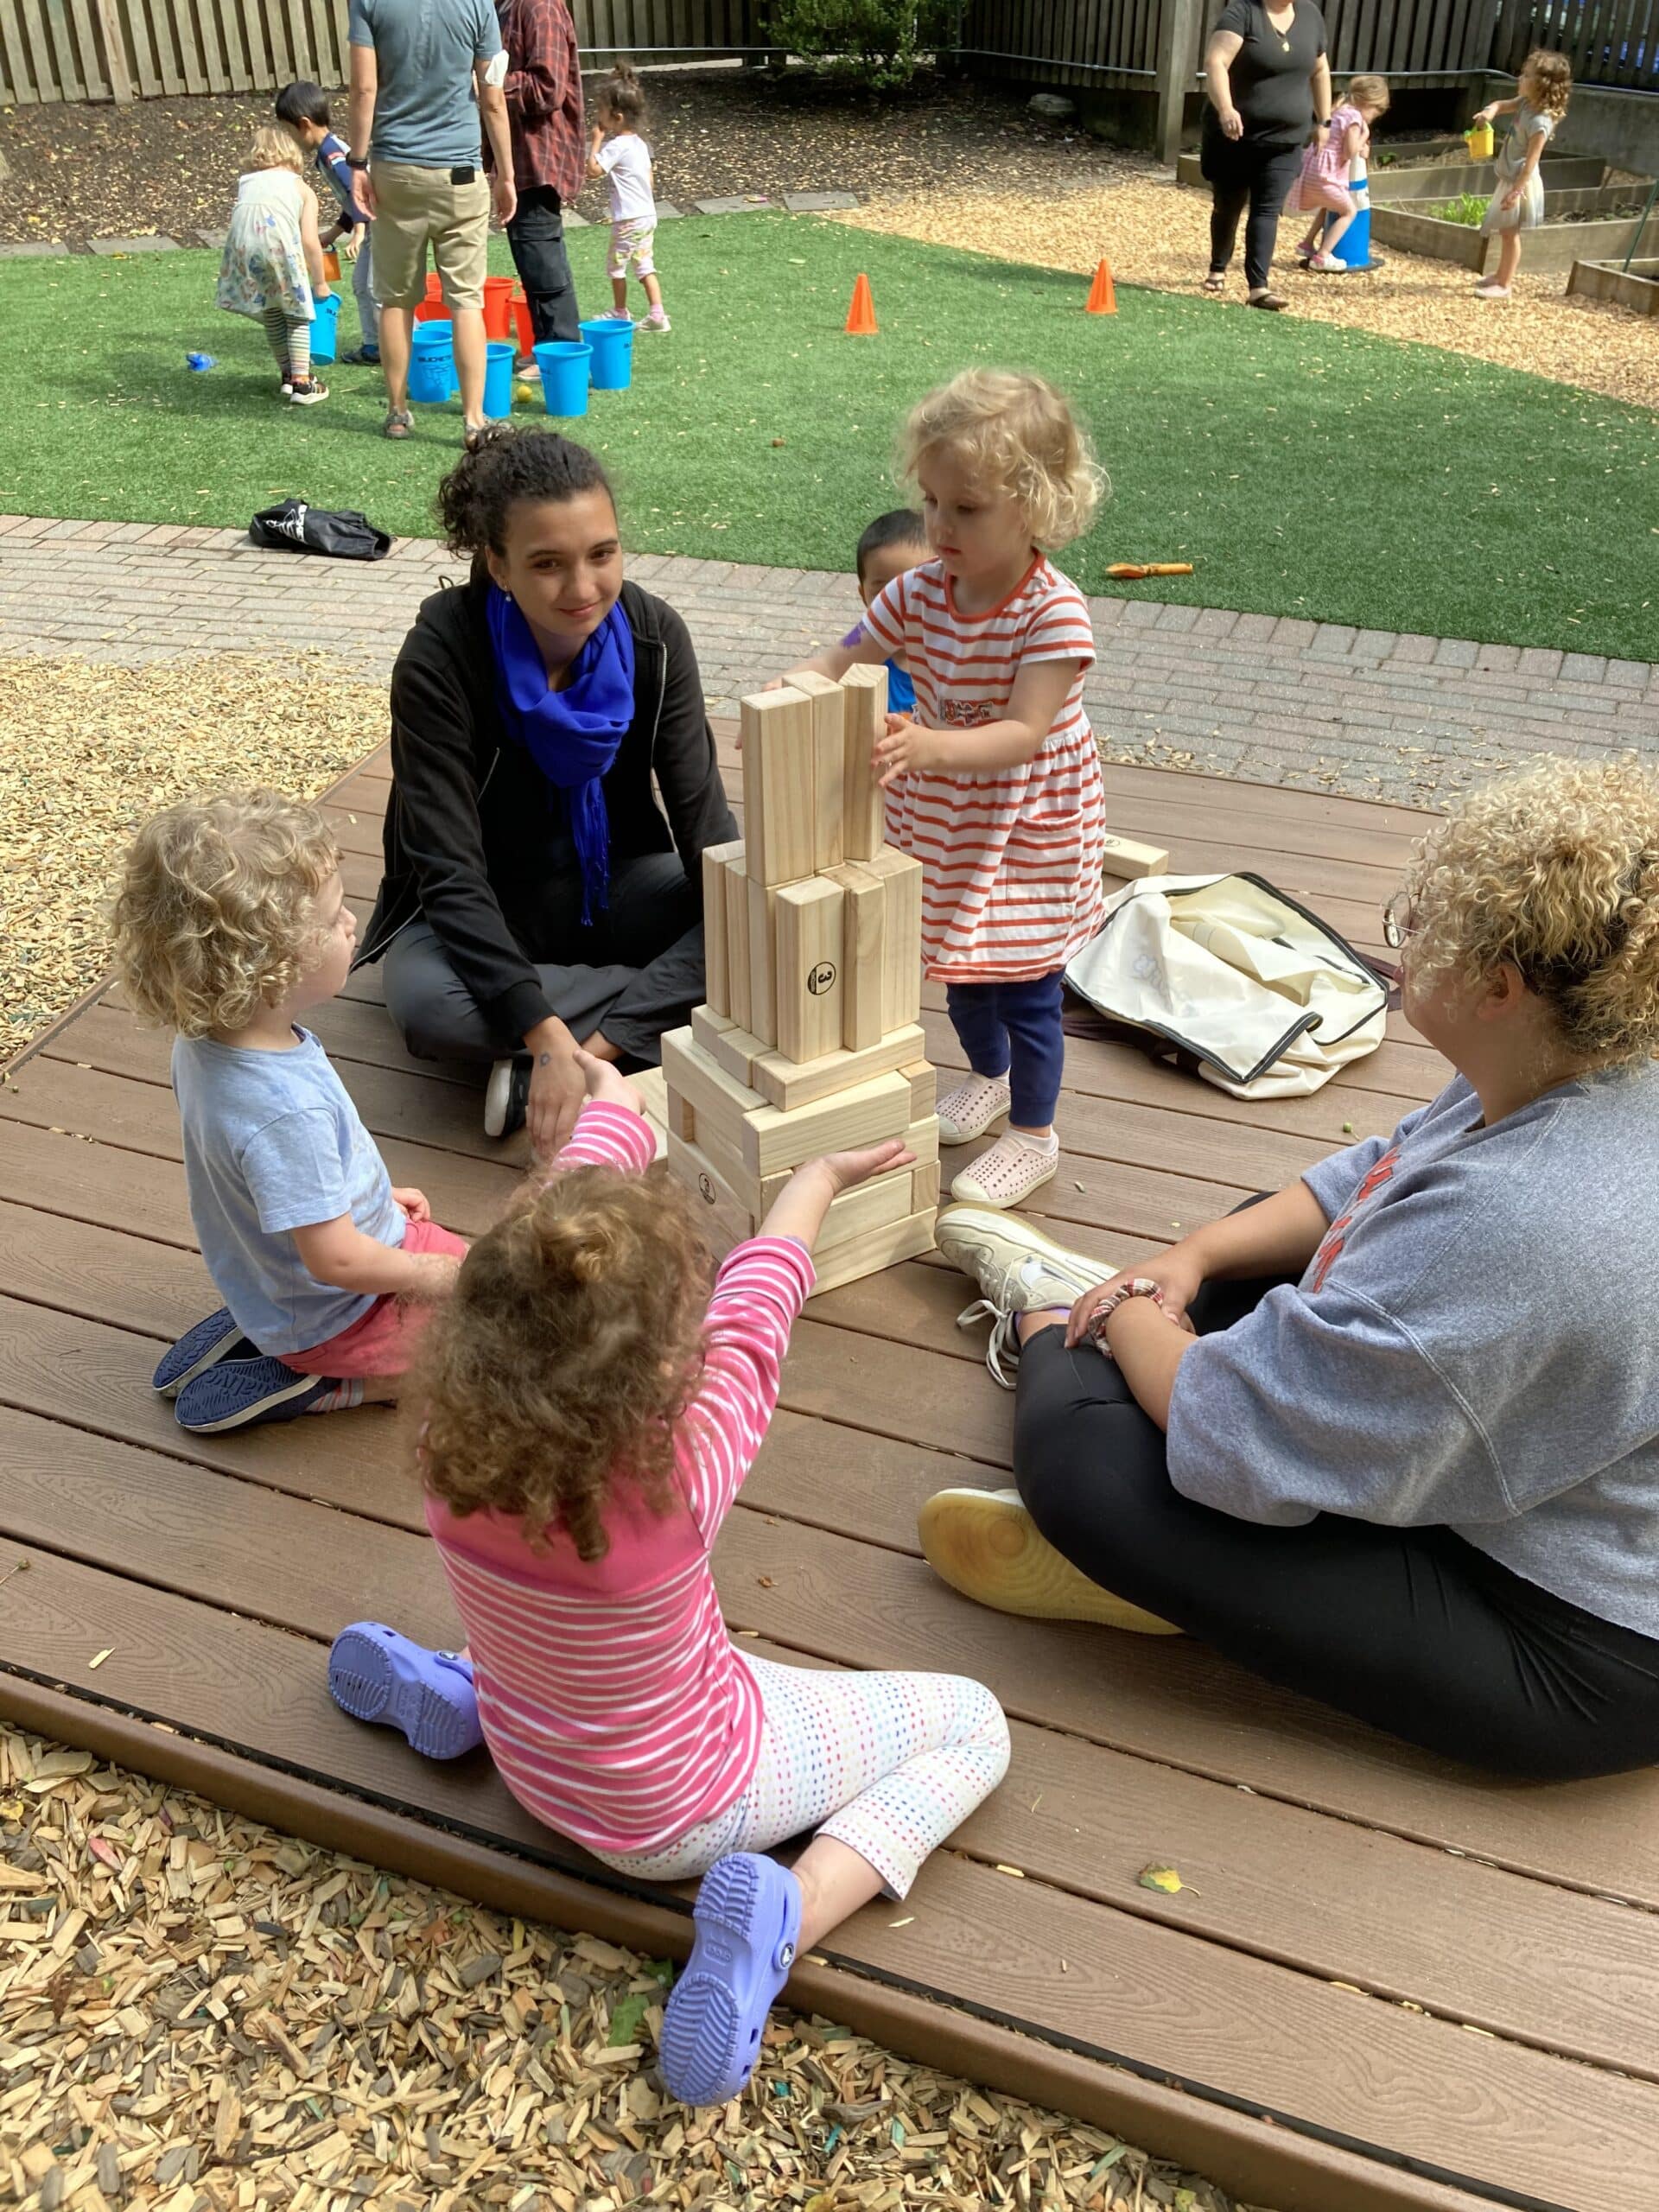 Children building a structure of blocks outdoors in the garden